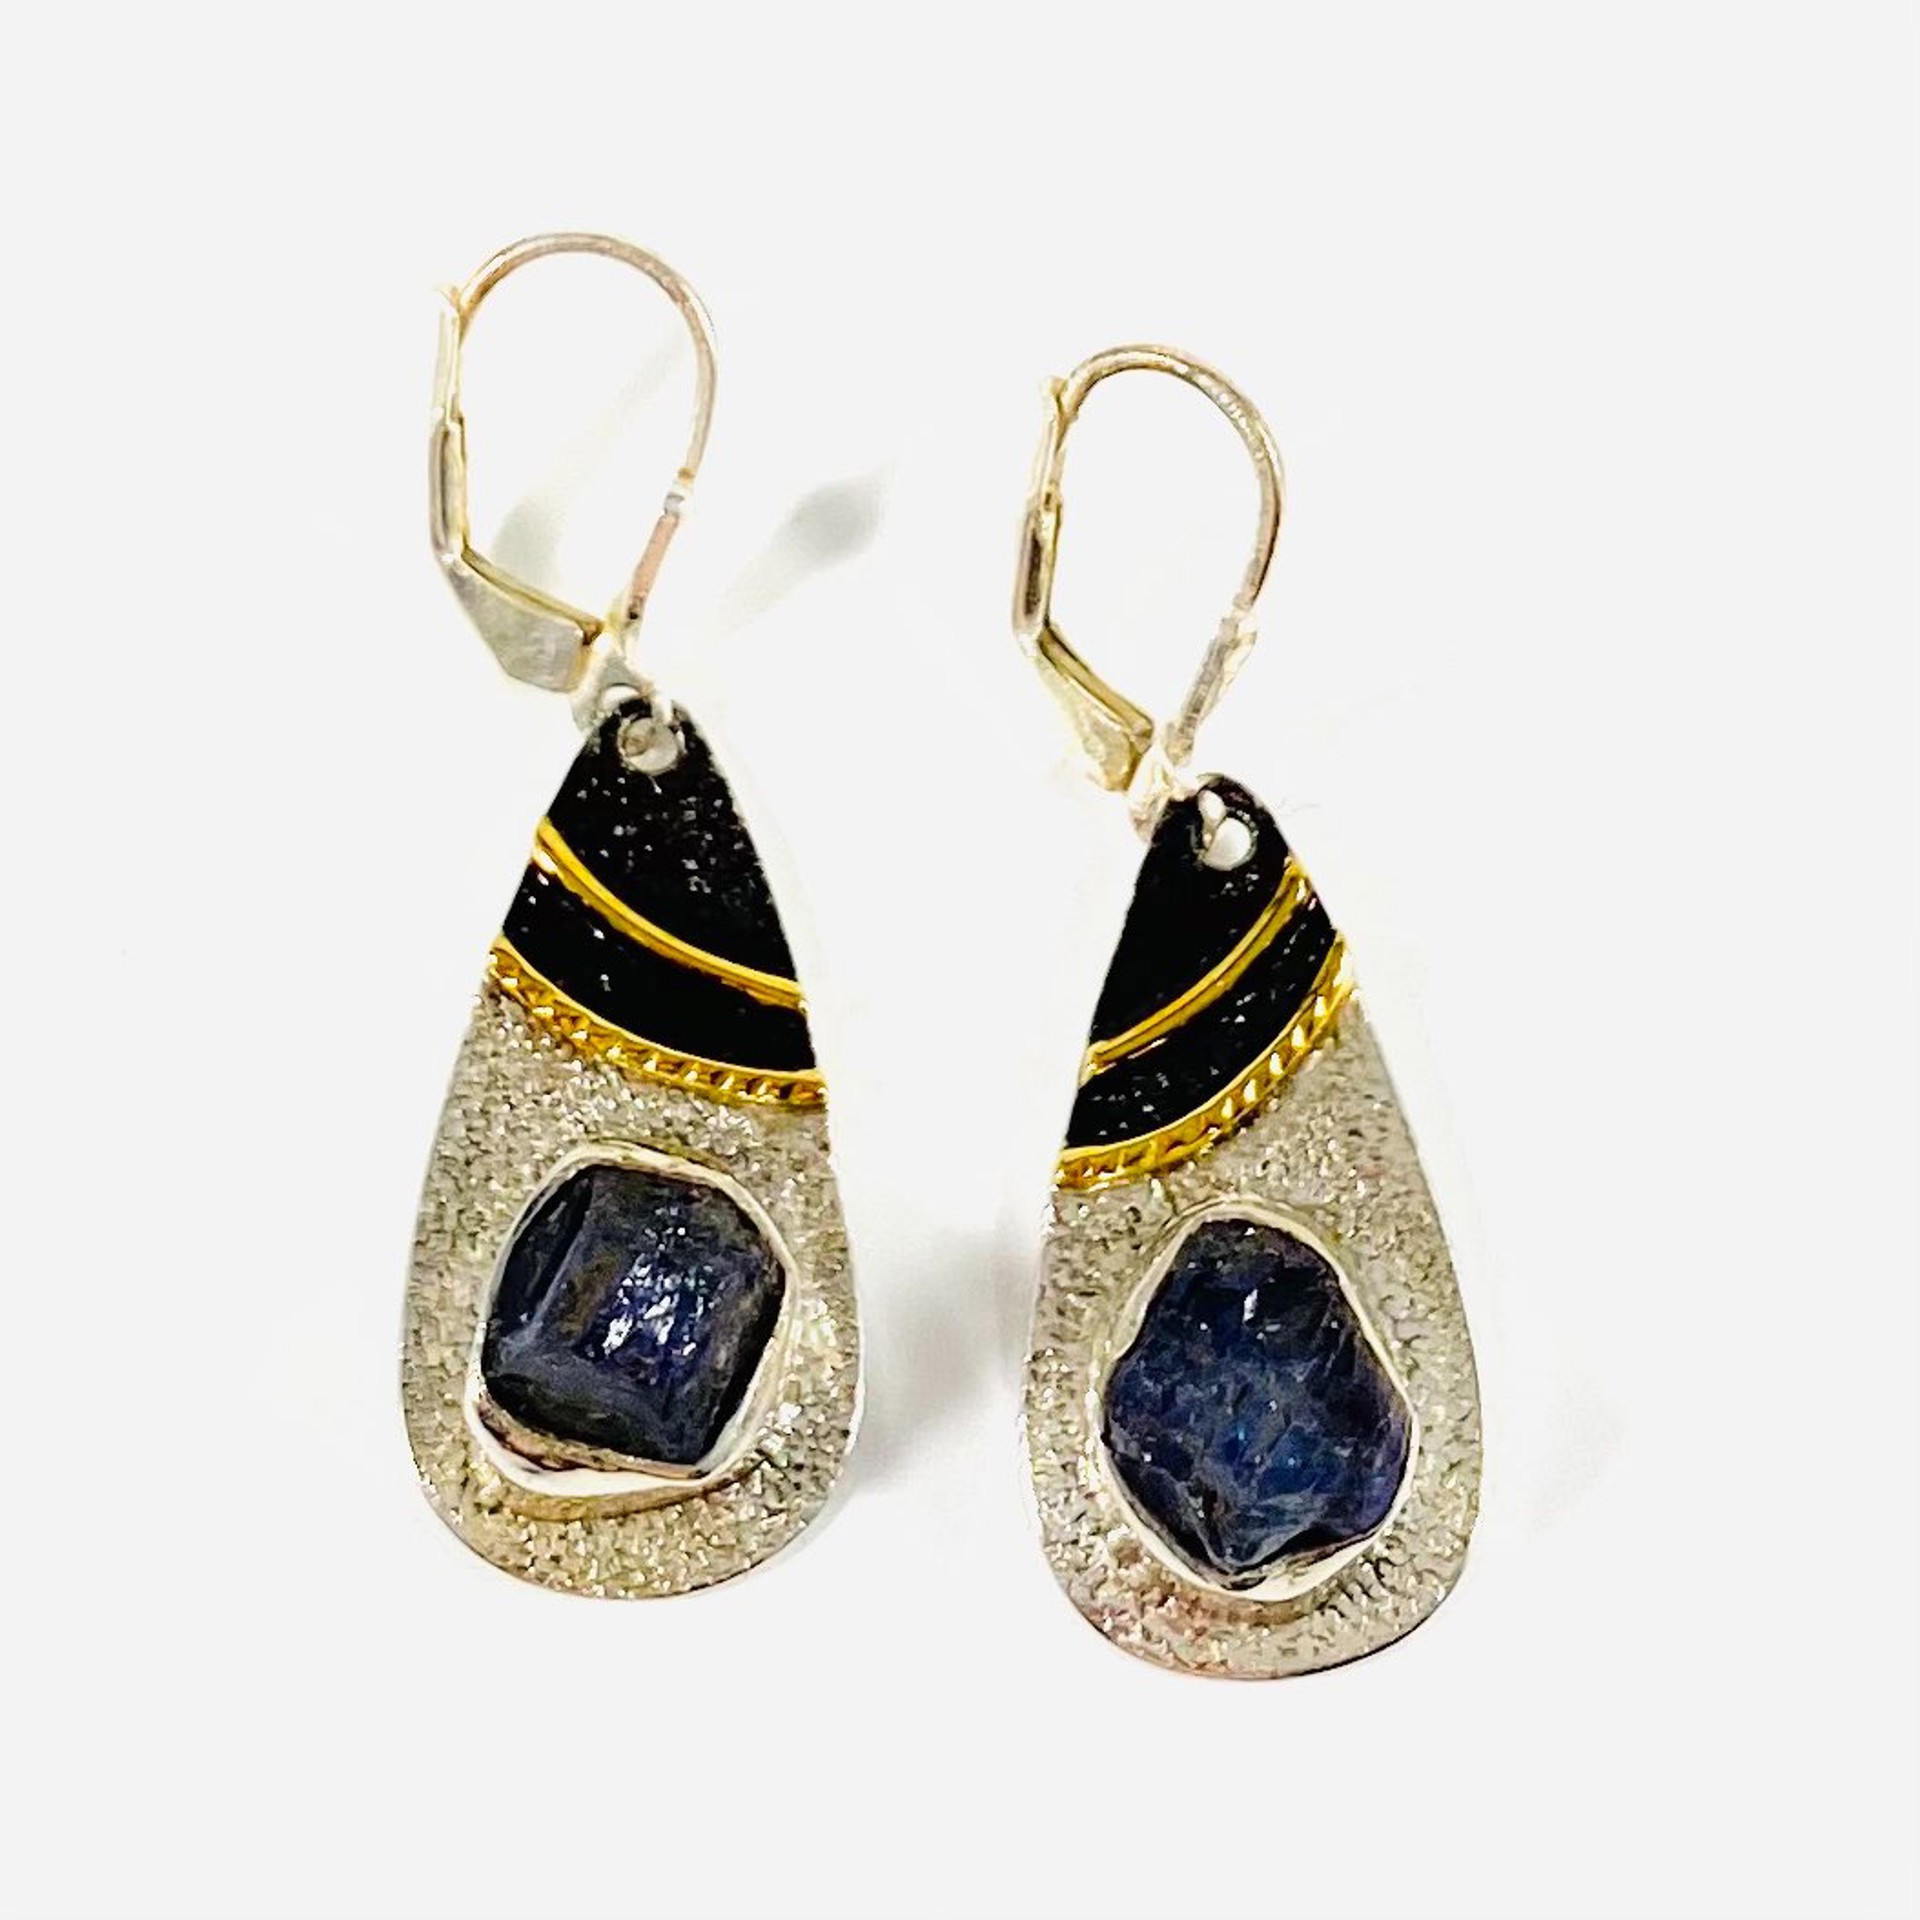 MON SE 3081 Tanzanite Earrings, french wire clasp by Monica Mehta